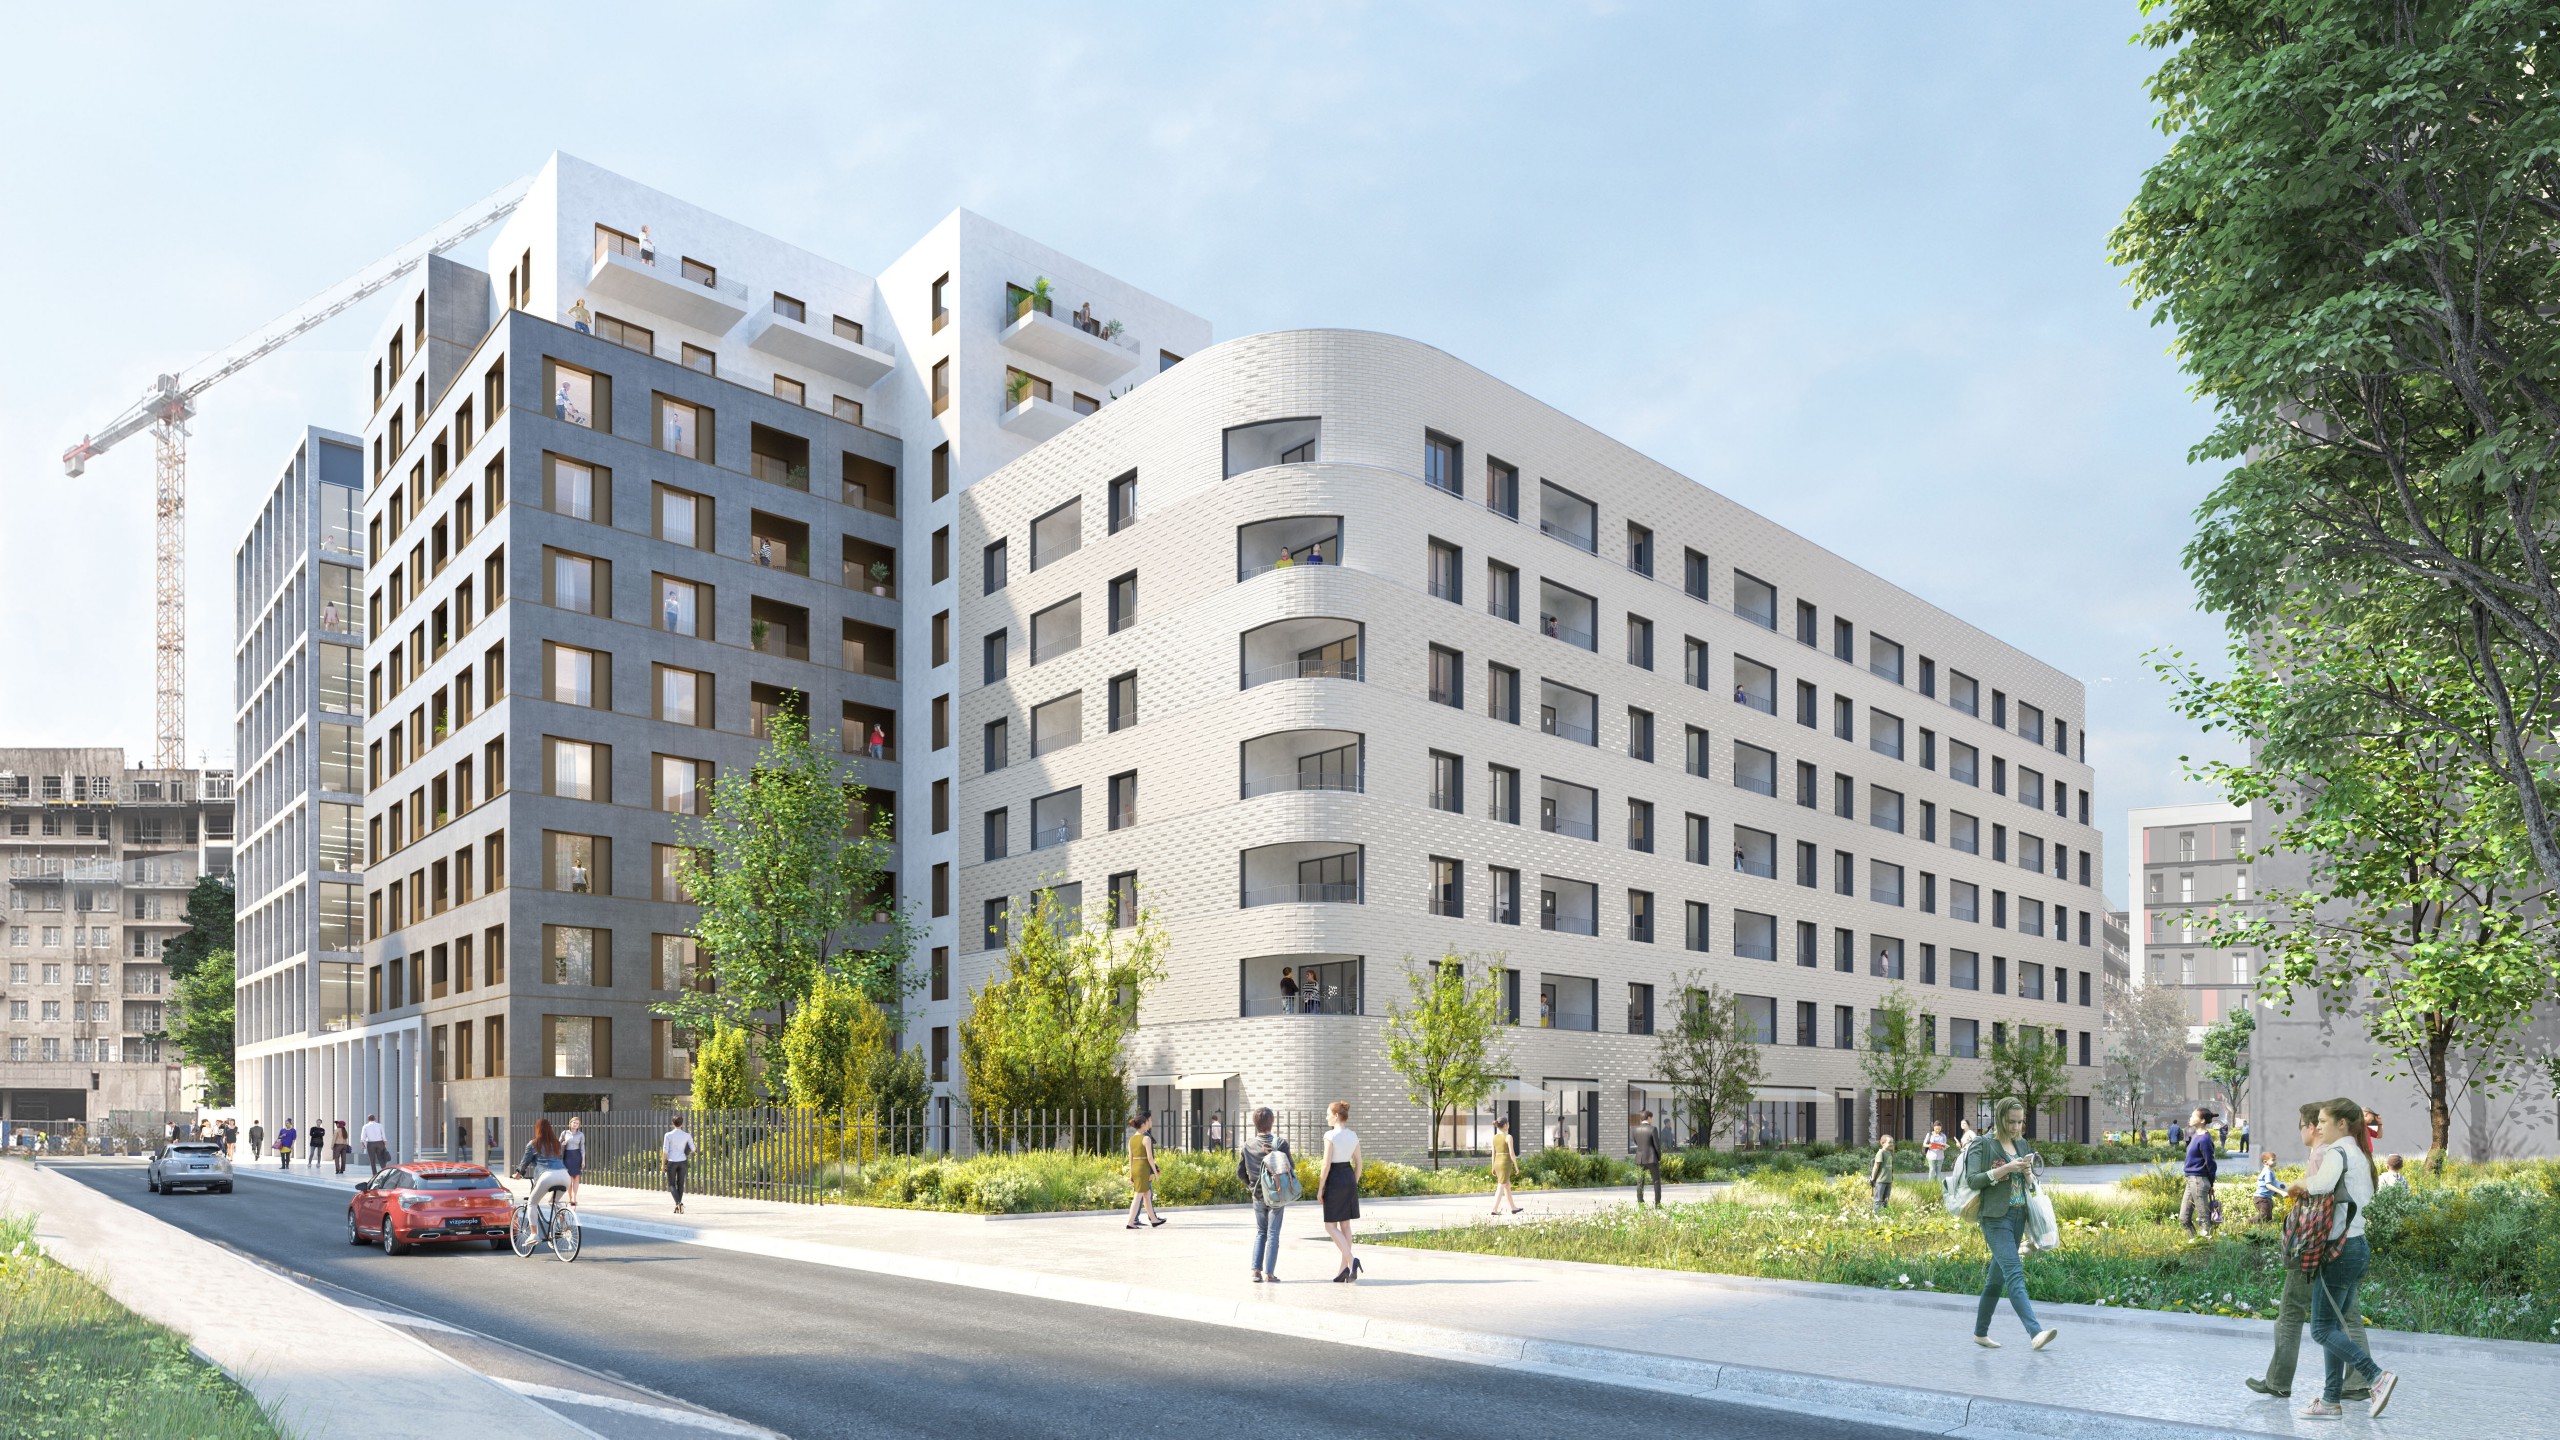 AMPERE Gestion acquires a new senior service residence on behalf of the FLI II investment fund